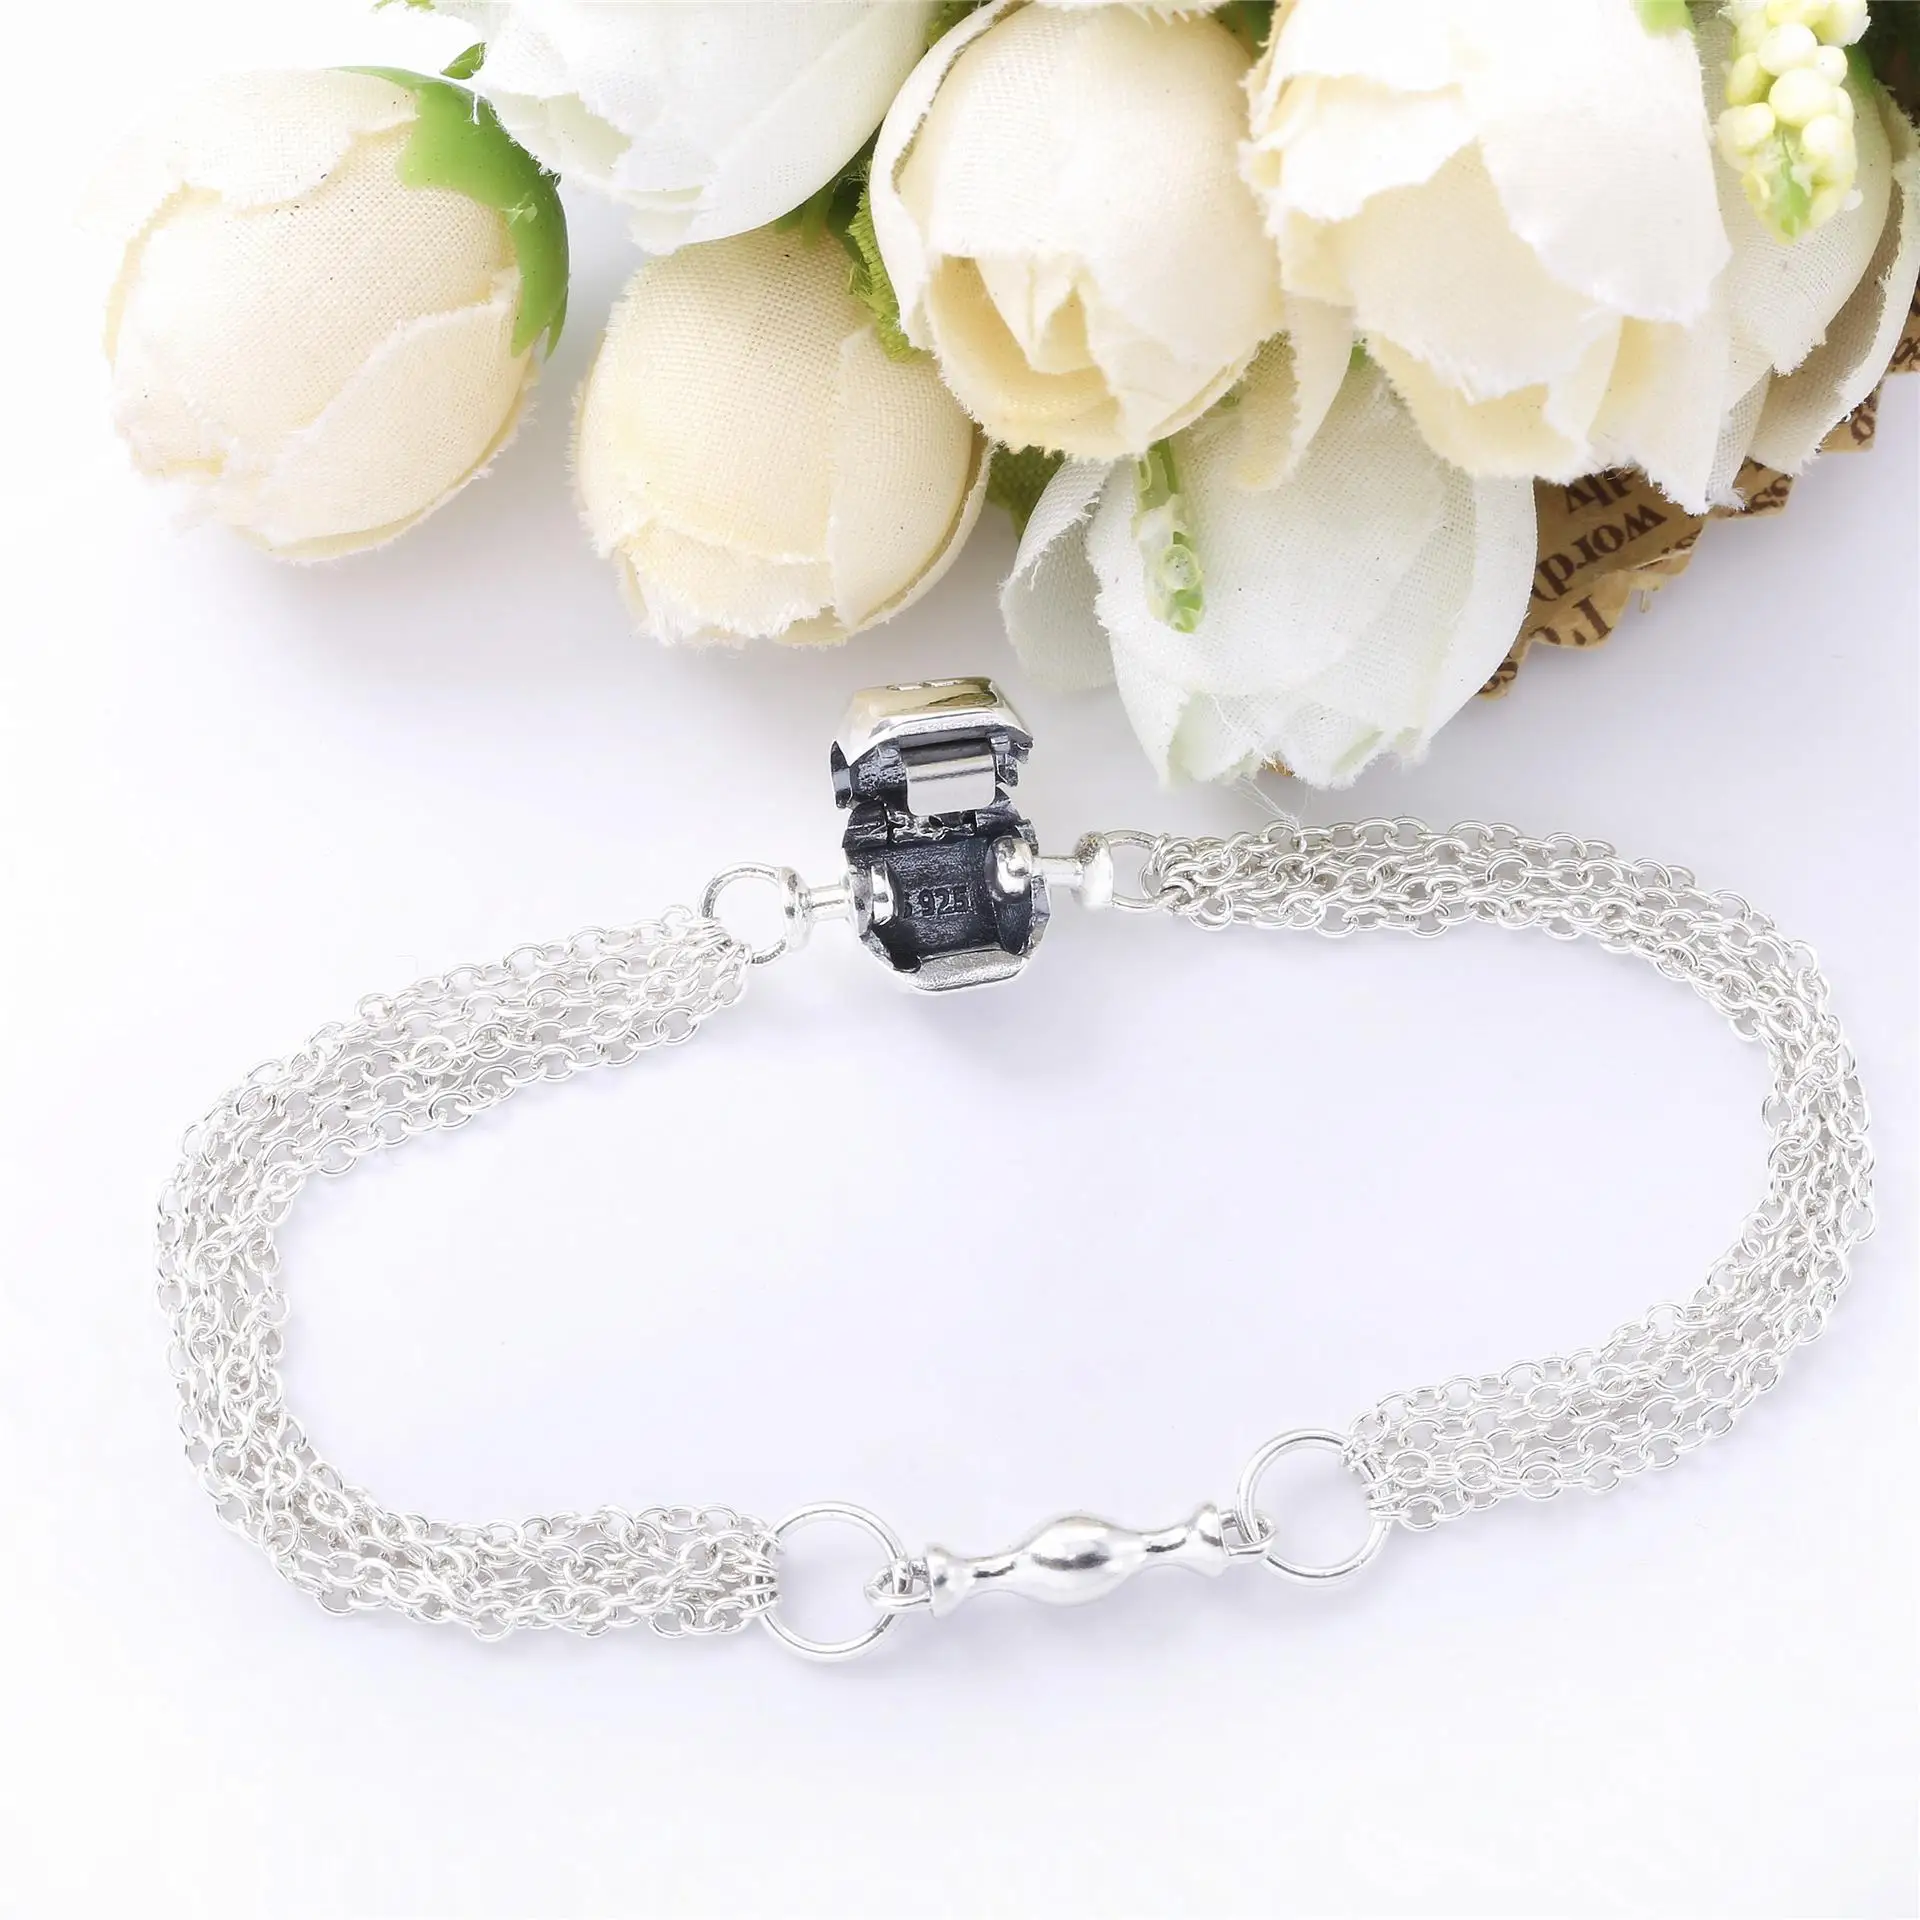 

100% 925 Sterling Silver Original Multi-Strand Europe Bracelet One Clip Station Fit Women Bead Charm Bangle Gift DIY Jewelry